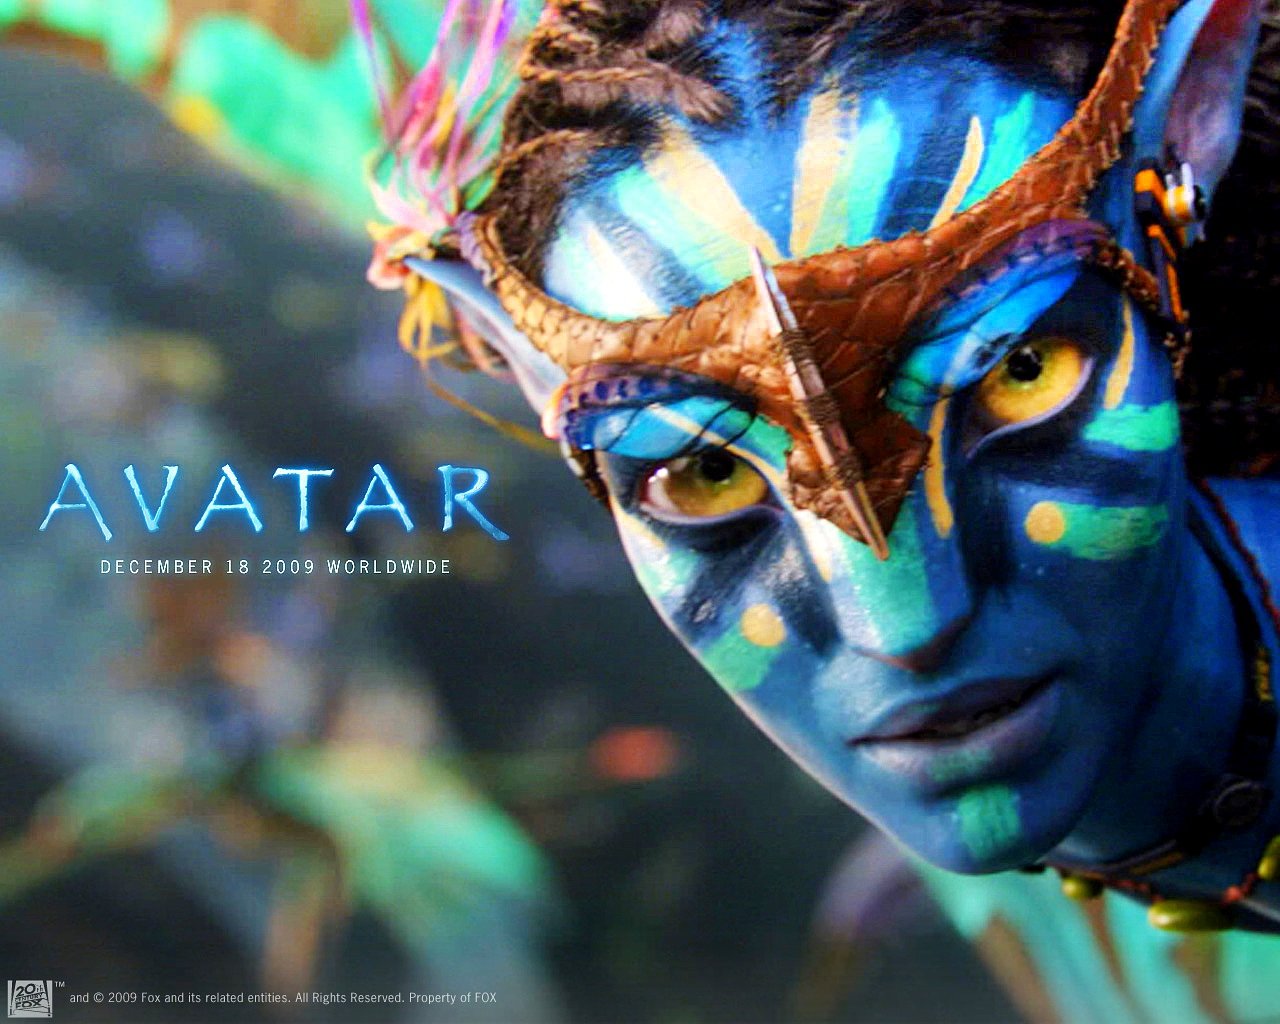 Download Avatar wallpapers for mobile phone free Avatar HD pictures